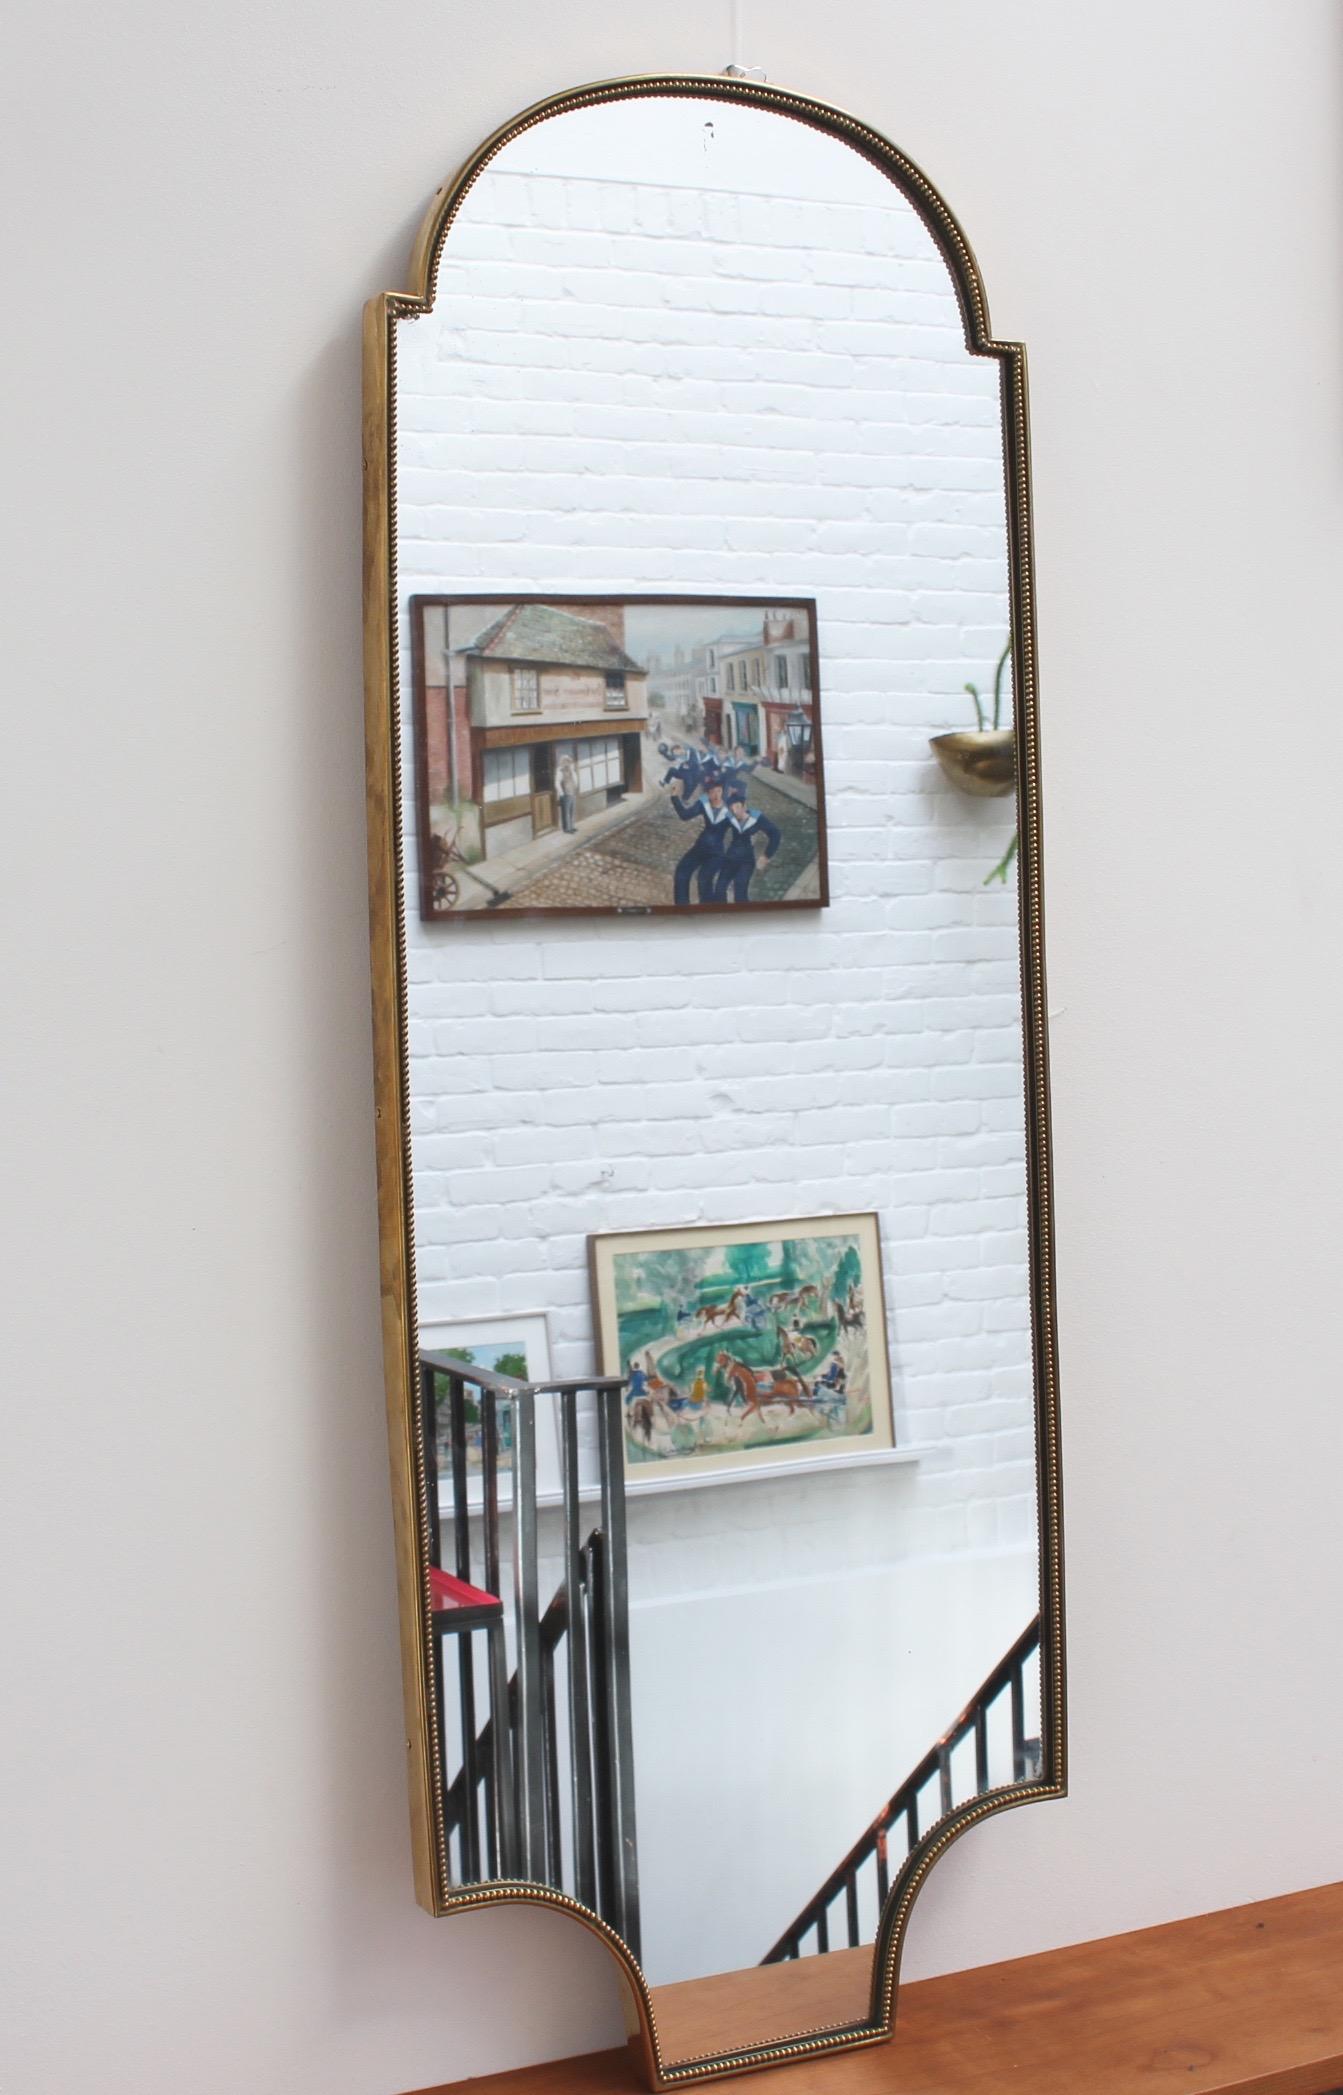 Midcentury Italian wall mirror with brass frame (circa 1950s). The mirror is lozenge-shaped, classically elegant and distinctive in a modern Gio Ponti style with a distinctive beaded detailing. This piece is in very good vintage condition. There are